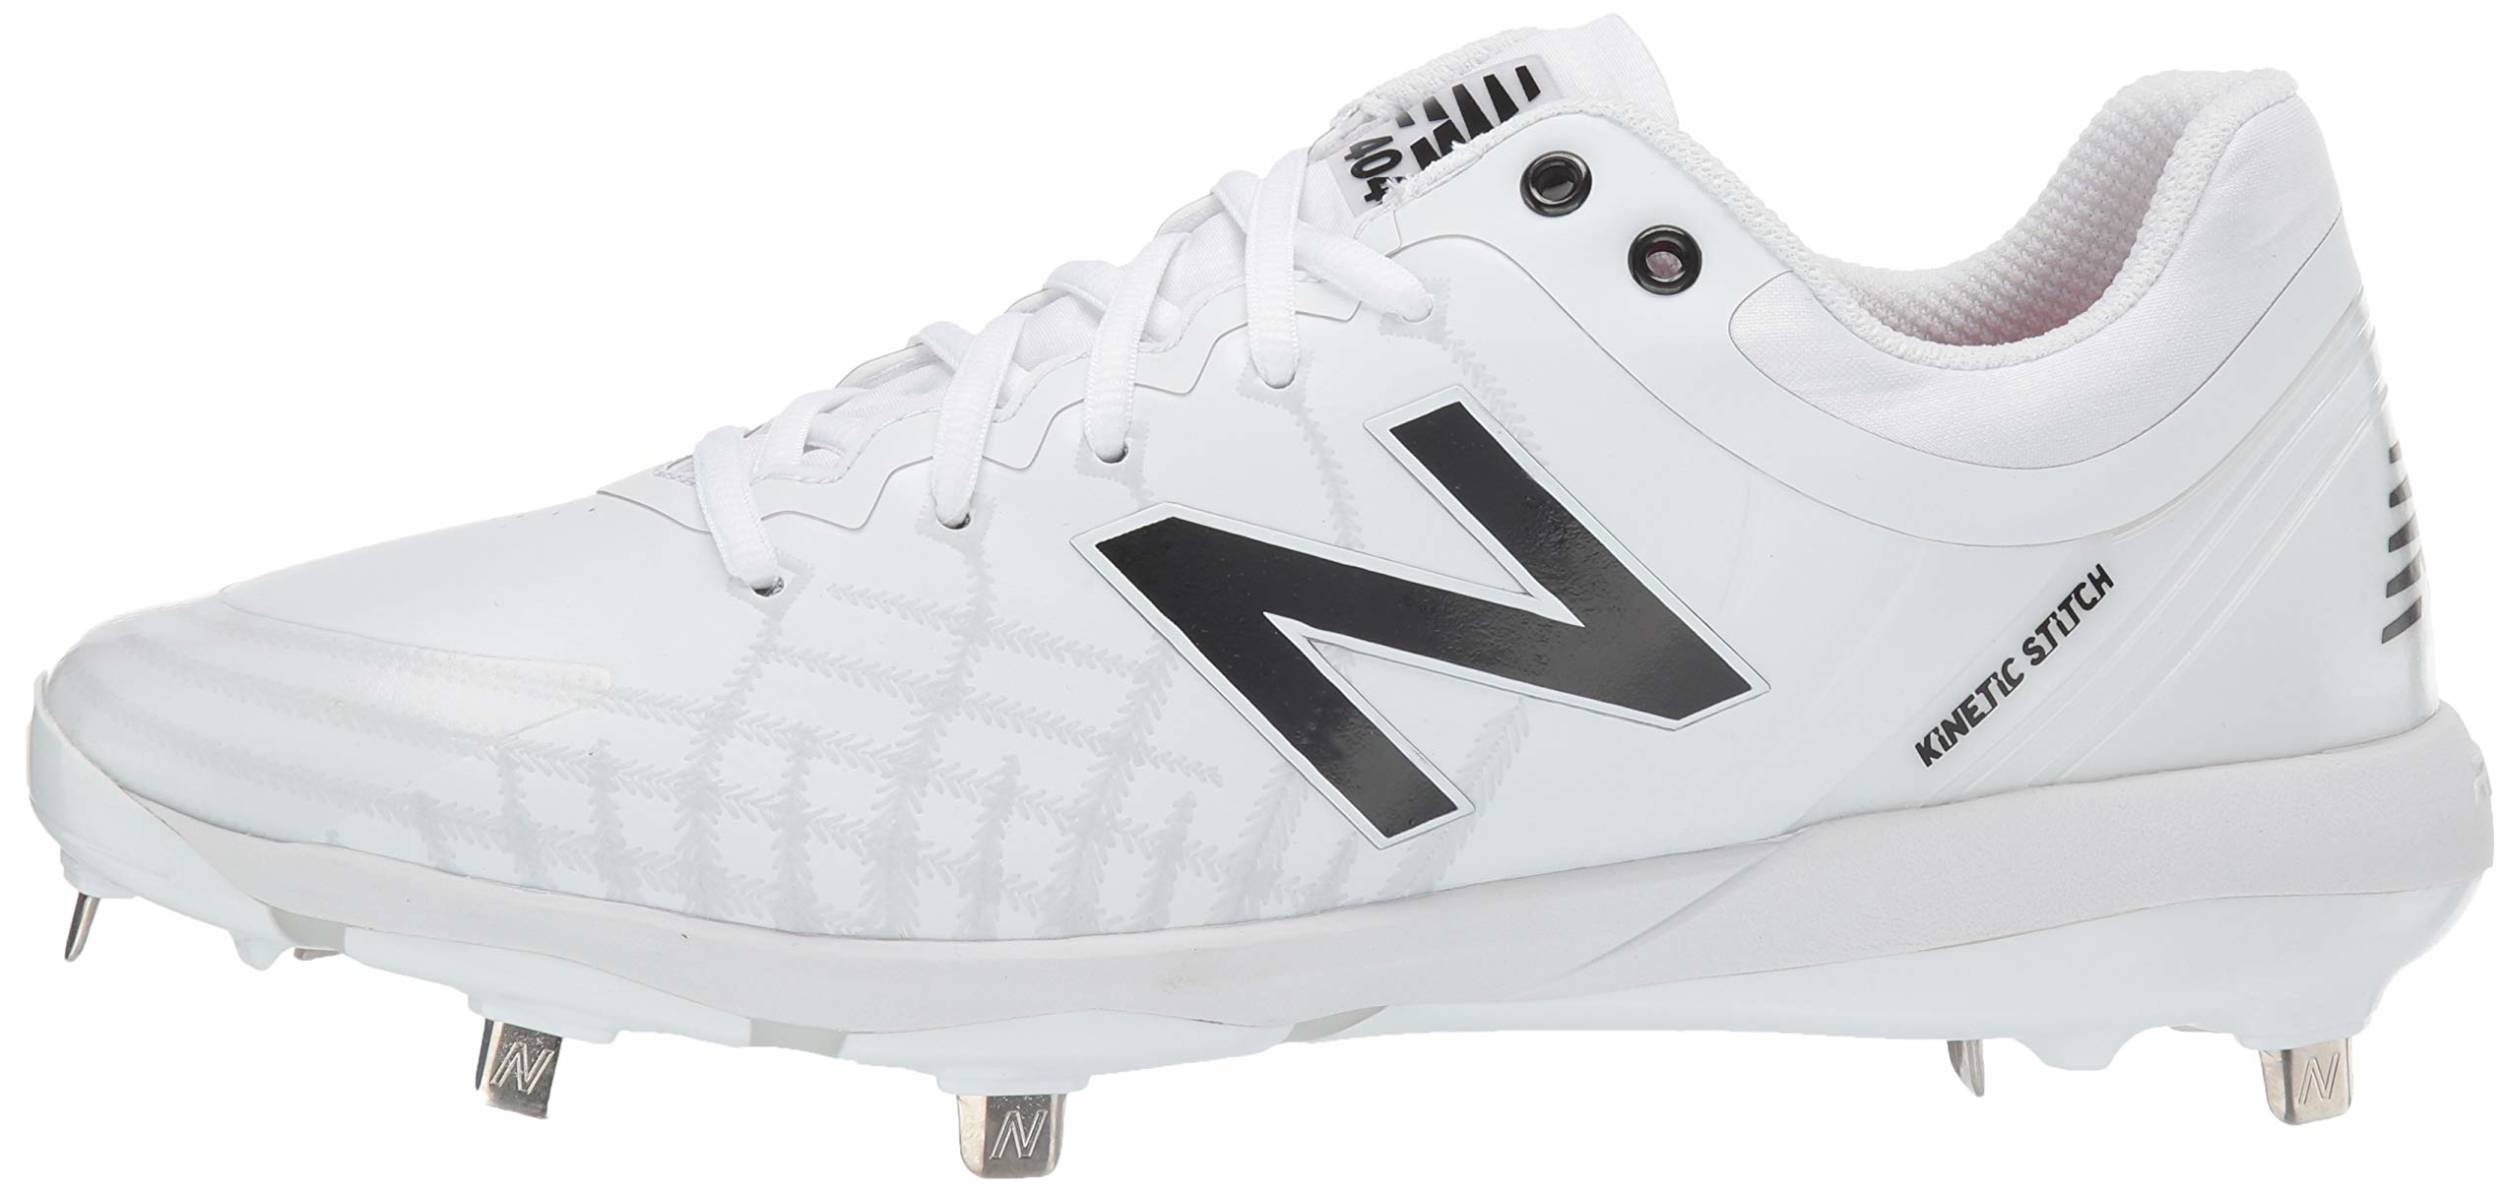 New Balance Mens Baseball Cleats Online Sale, UP TO 8 OFF